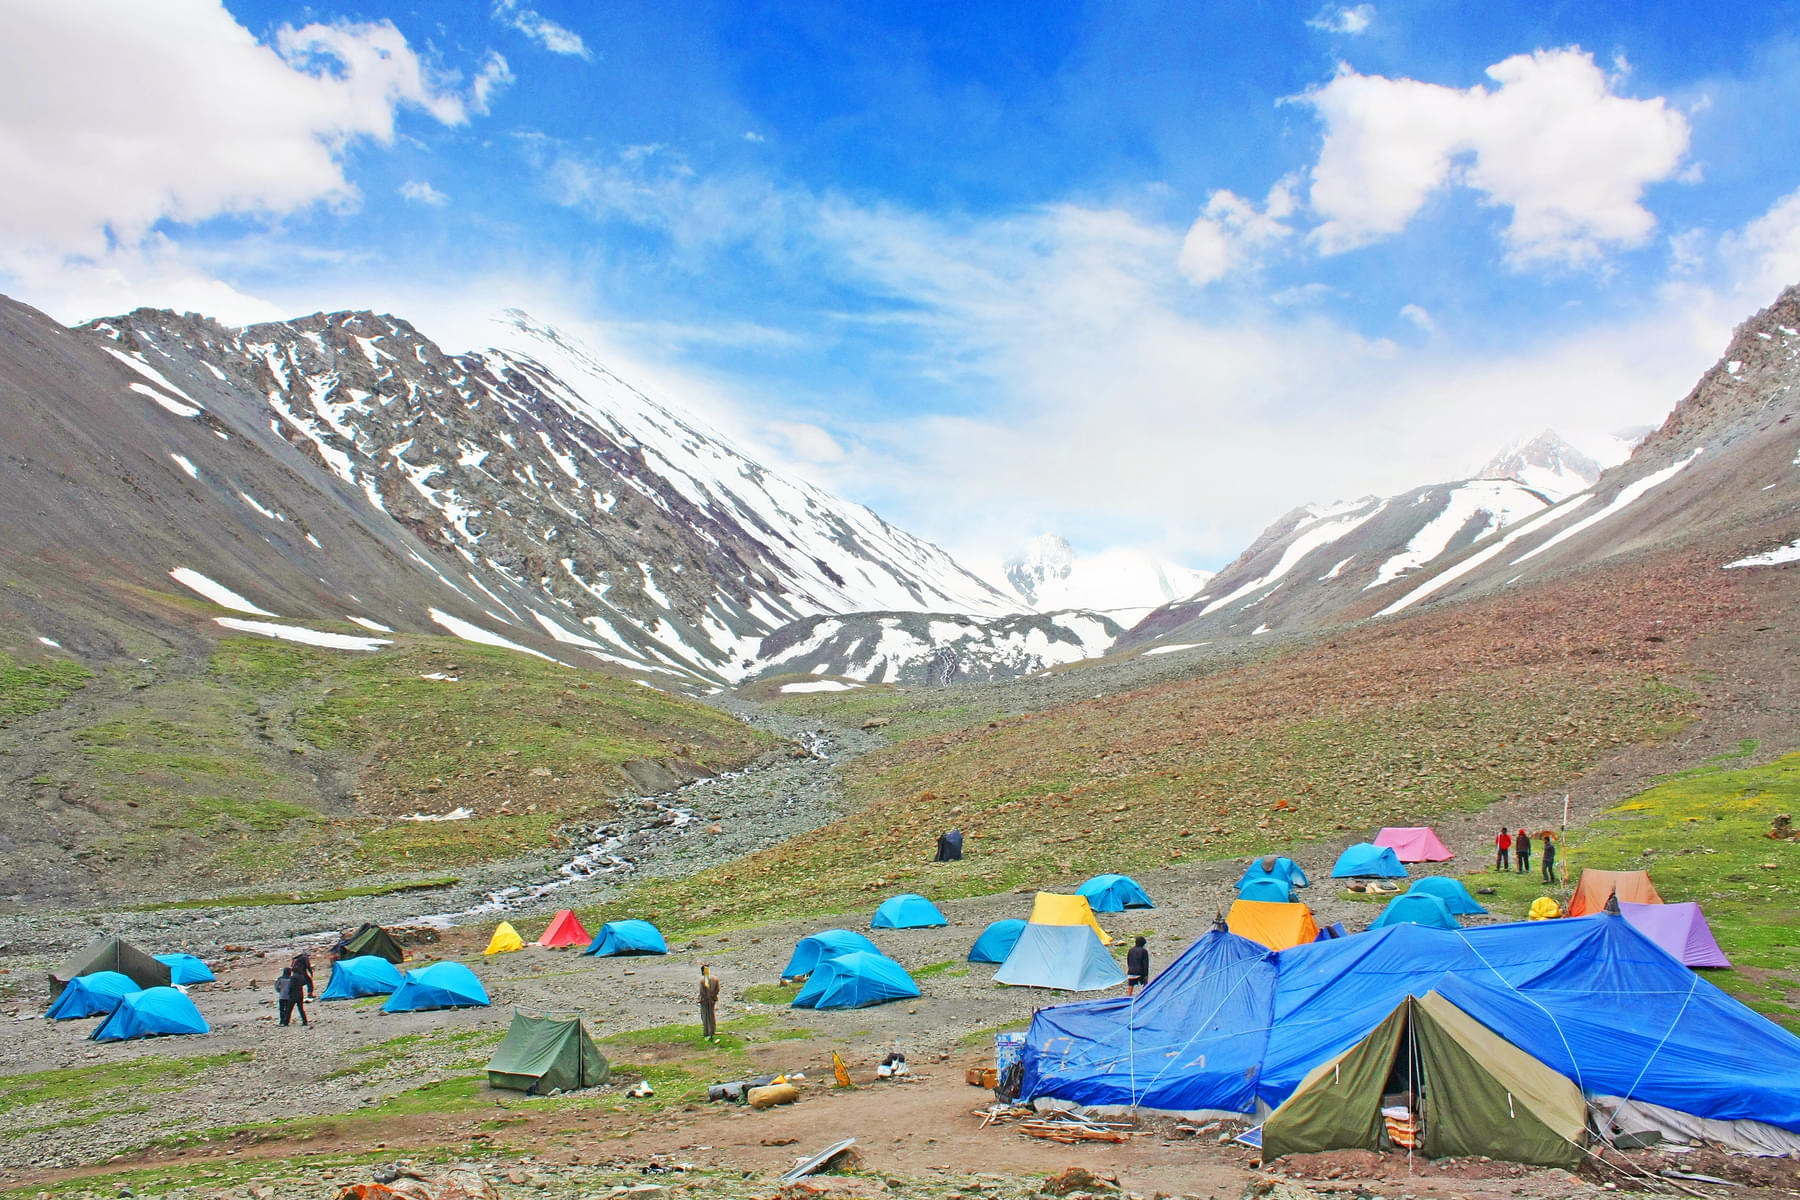 Enjoy camping amidst the scenic landscapes of Mankorma and share stories with your fellow trekkers